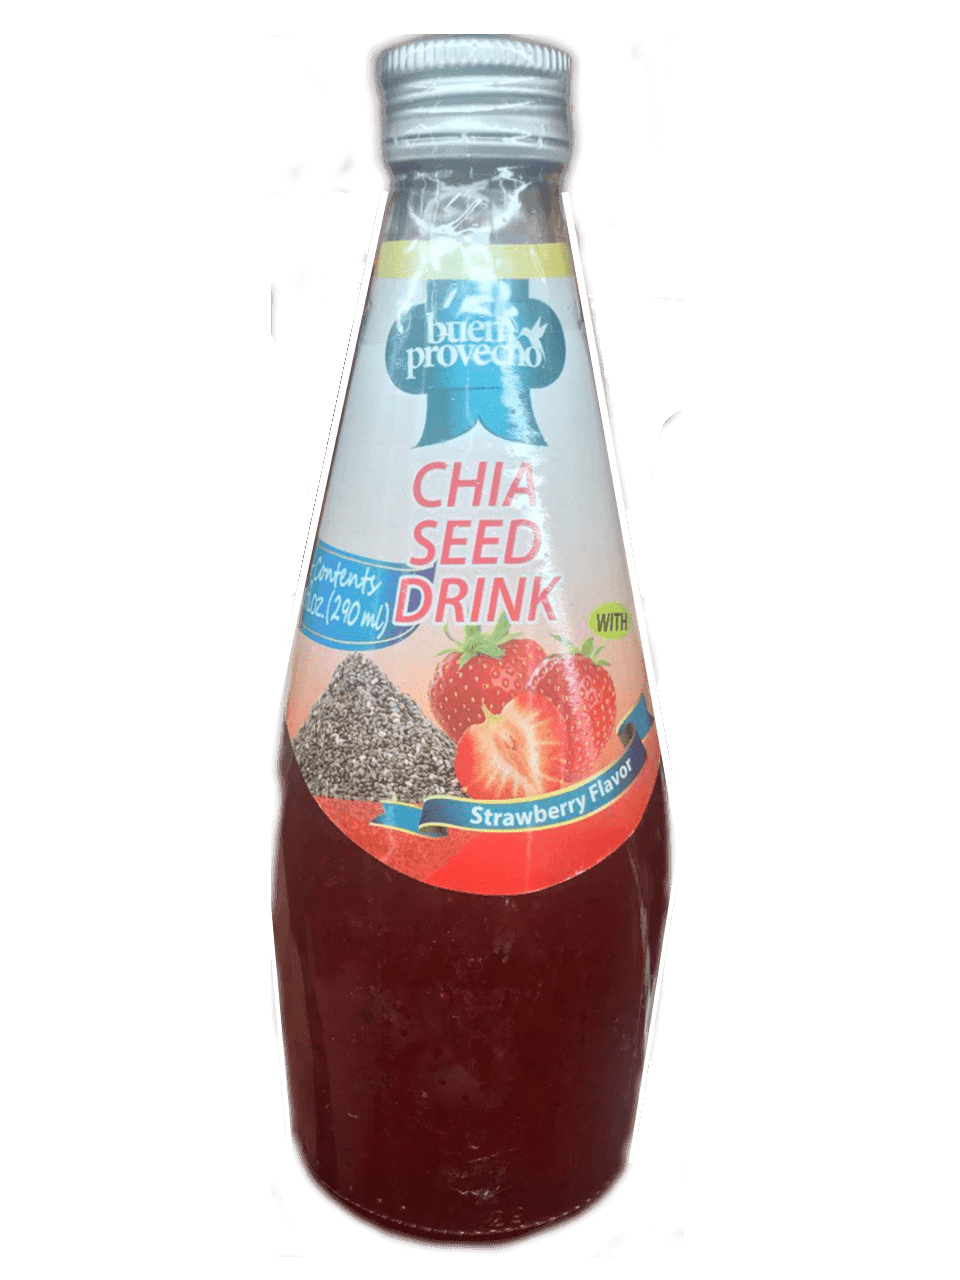 Buen Provecho - Chia Seed Drink with Strawberry 9.8 Fl. oz.